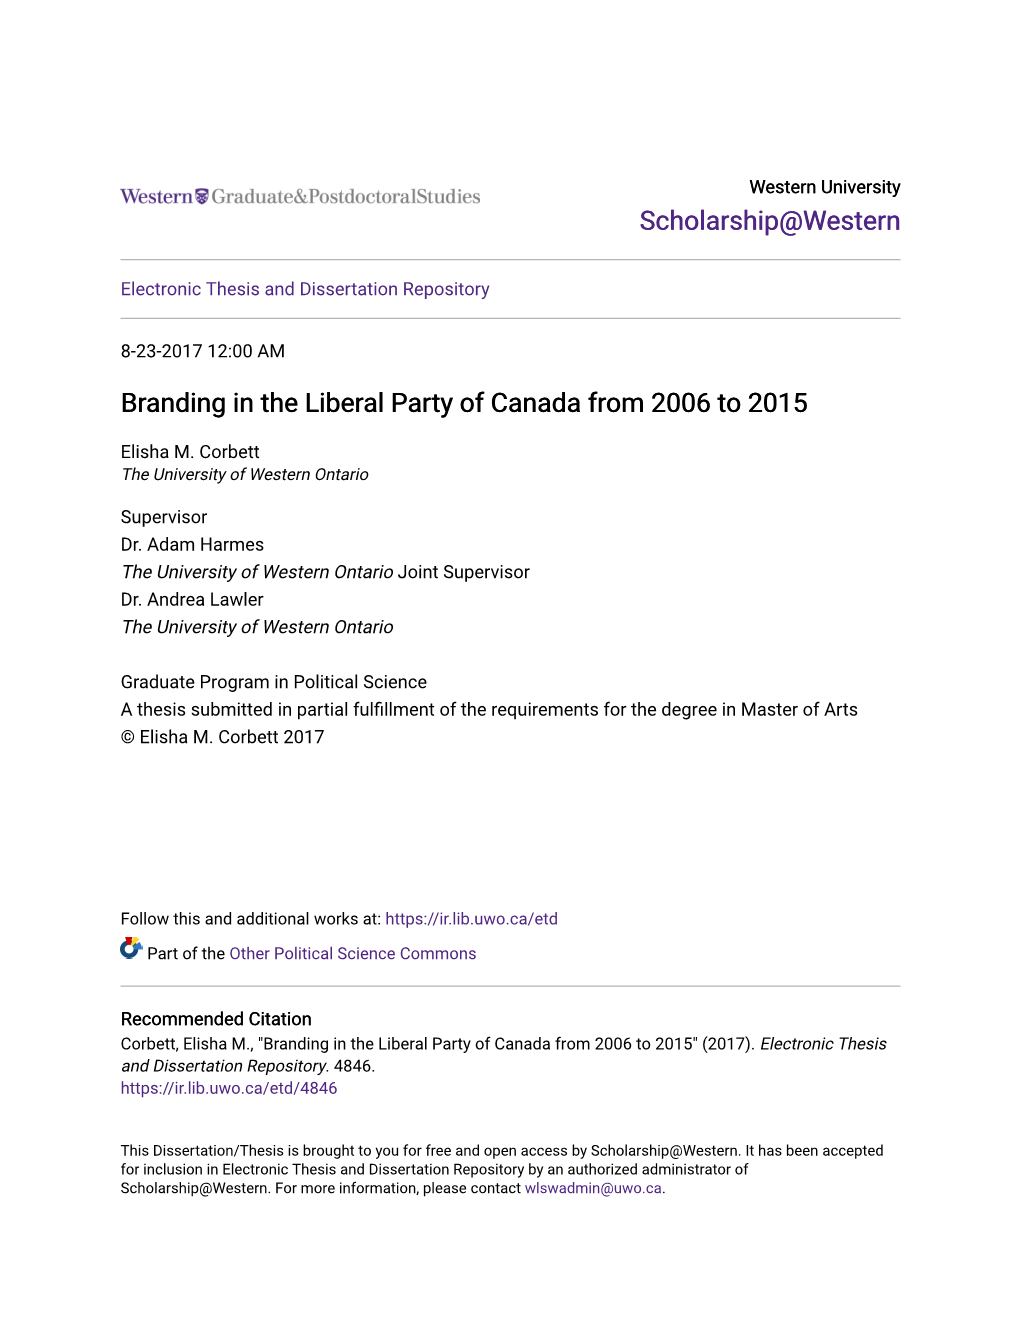 Branding in the Liberal Party of Canada from 2006 to 2015